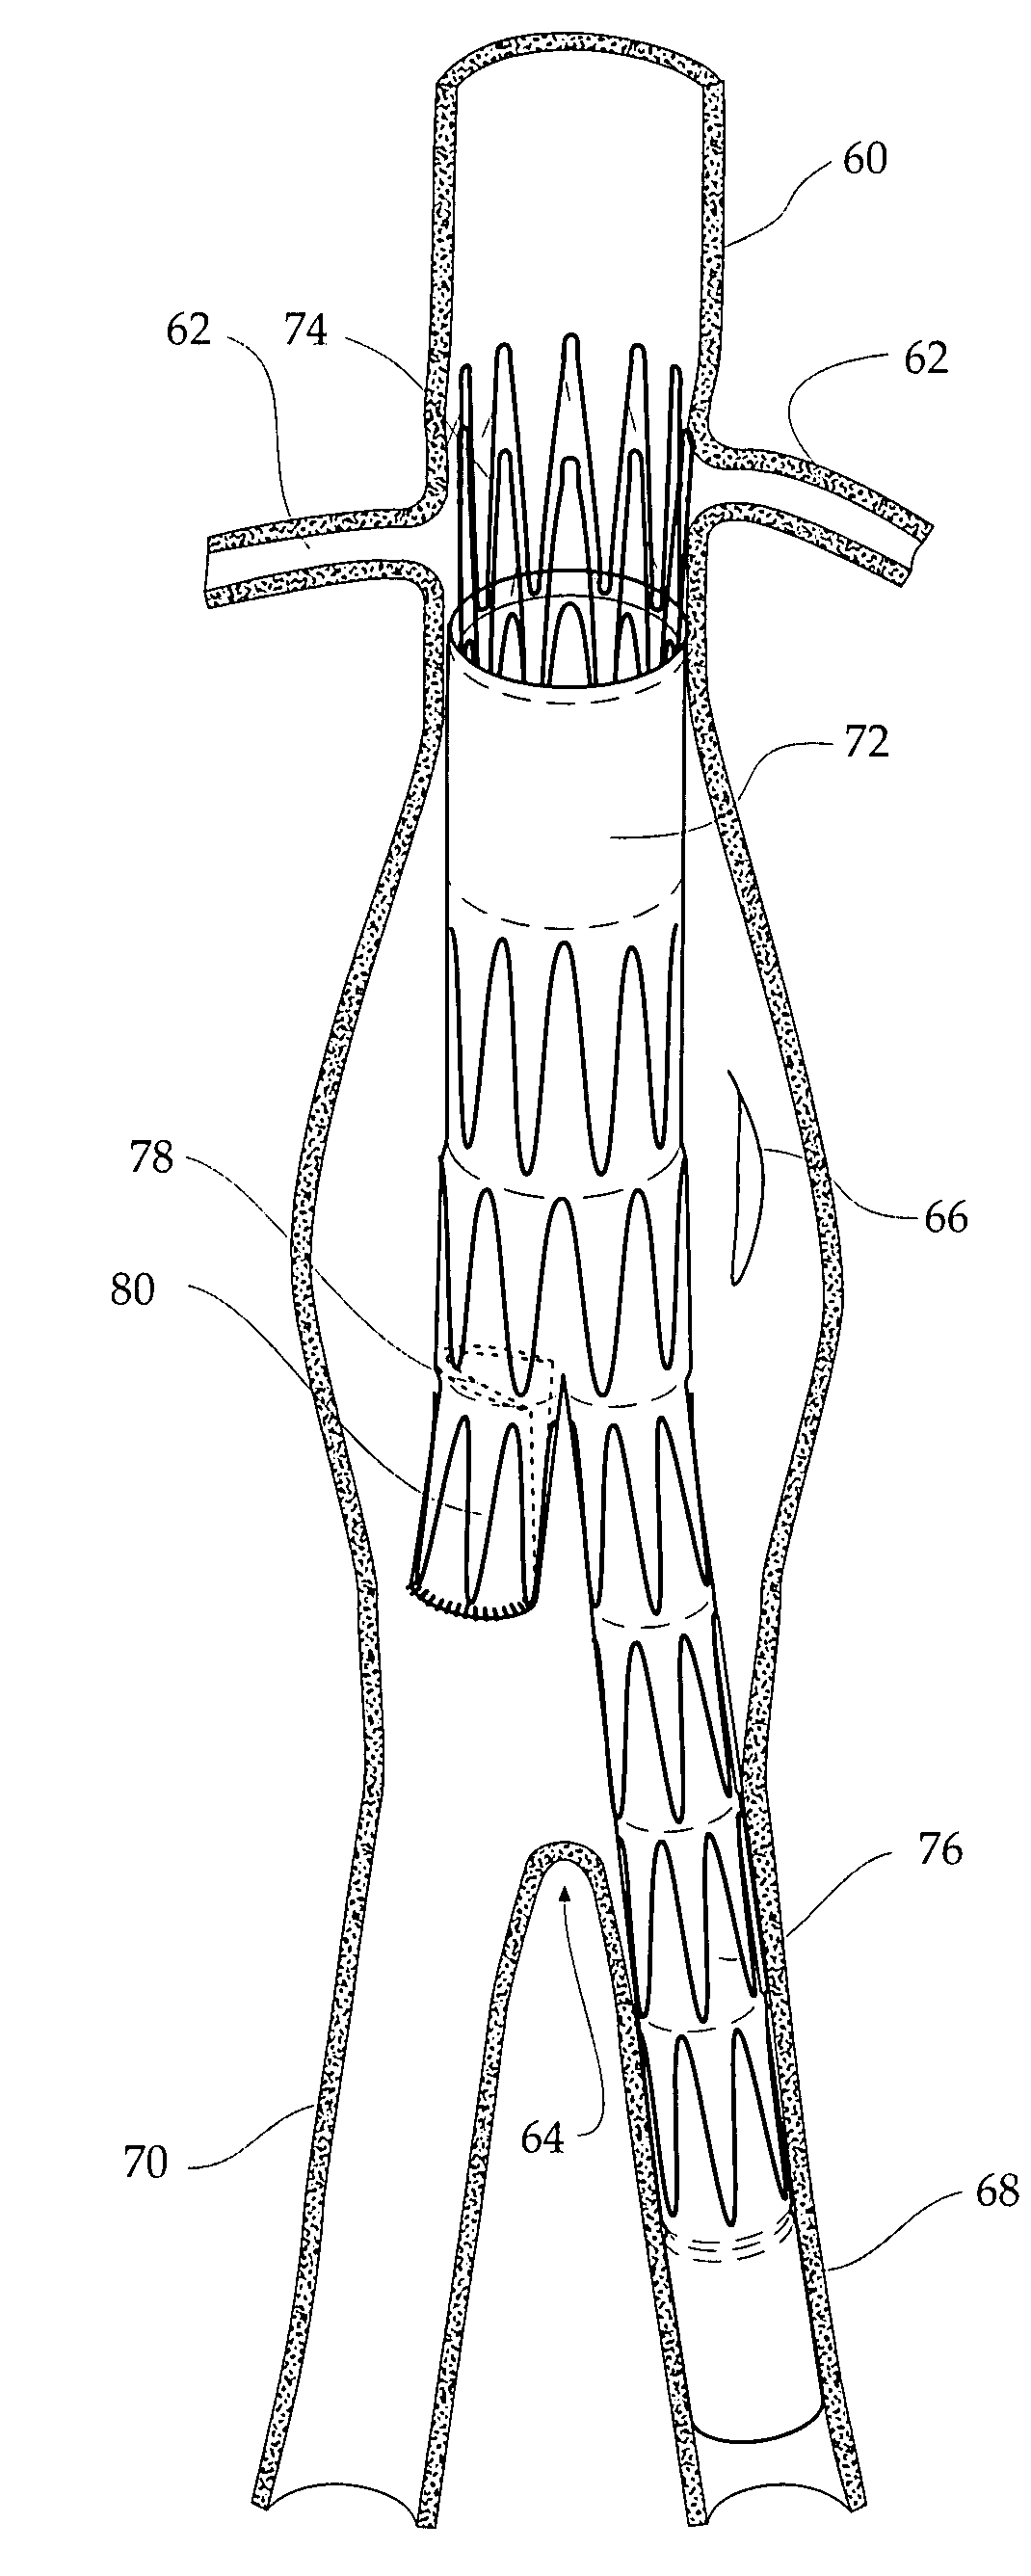 Stent graft for treatment of emergency rupture of a vessel